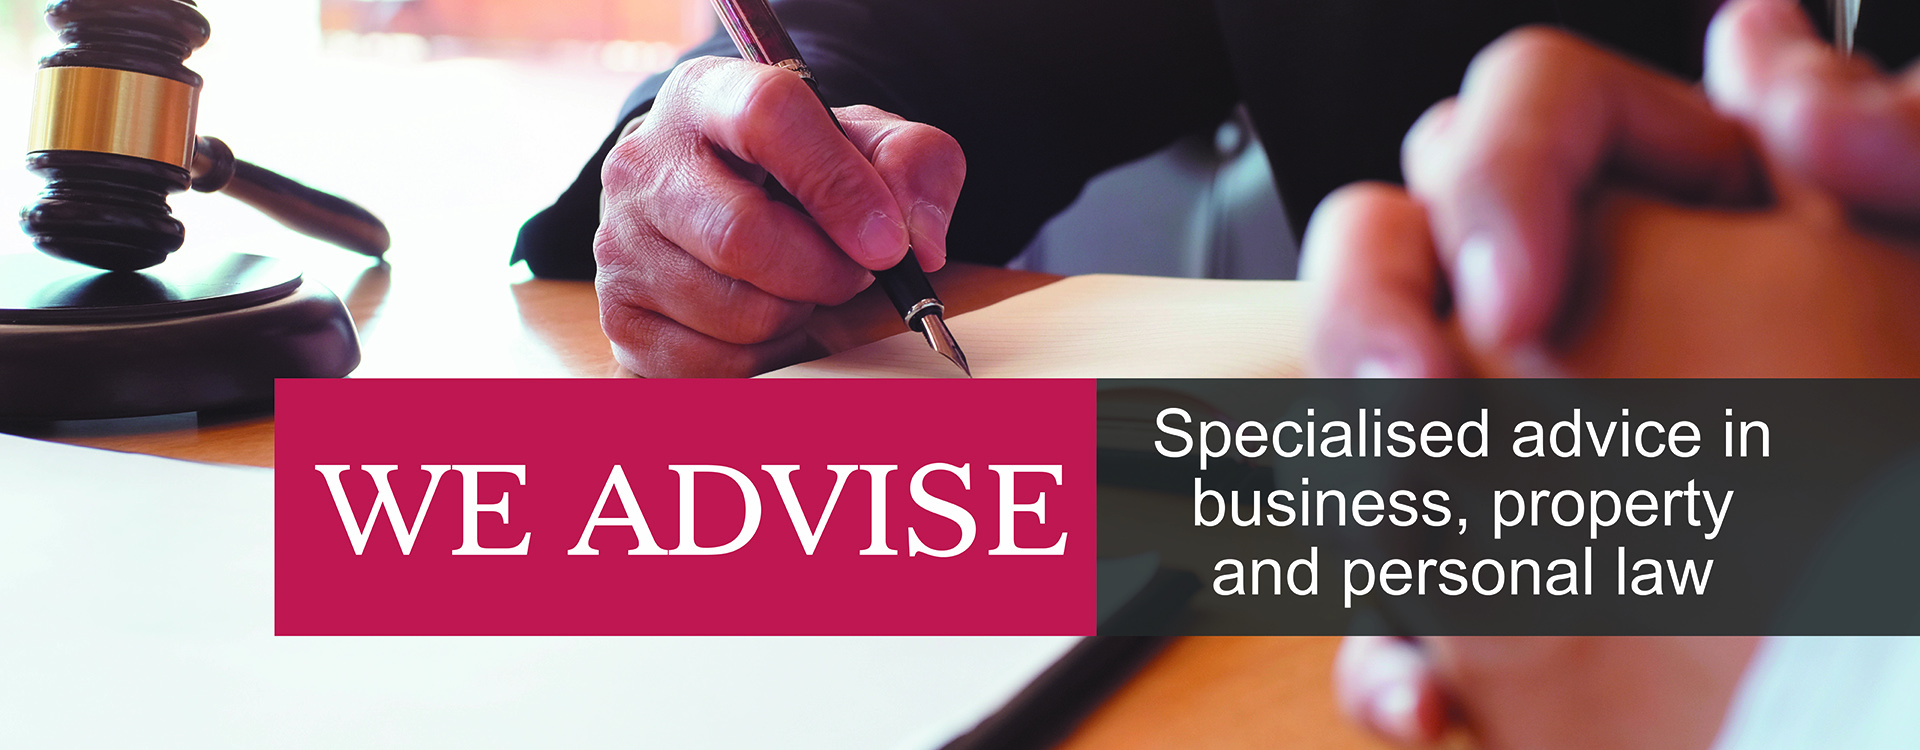 We advise. Specialized advice in business, property and personal law.